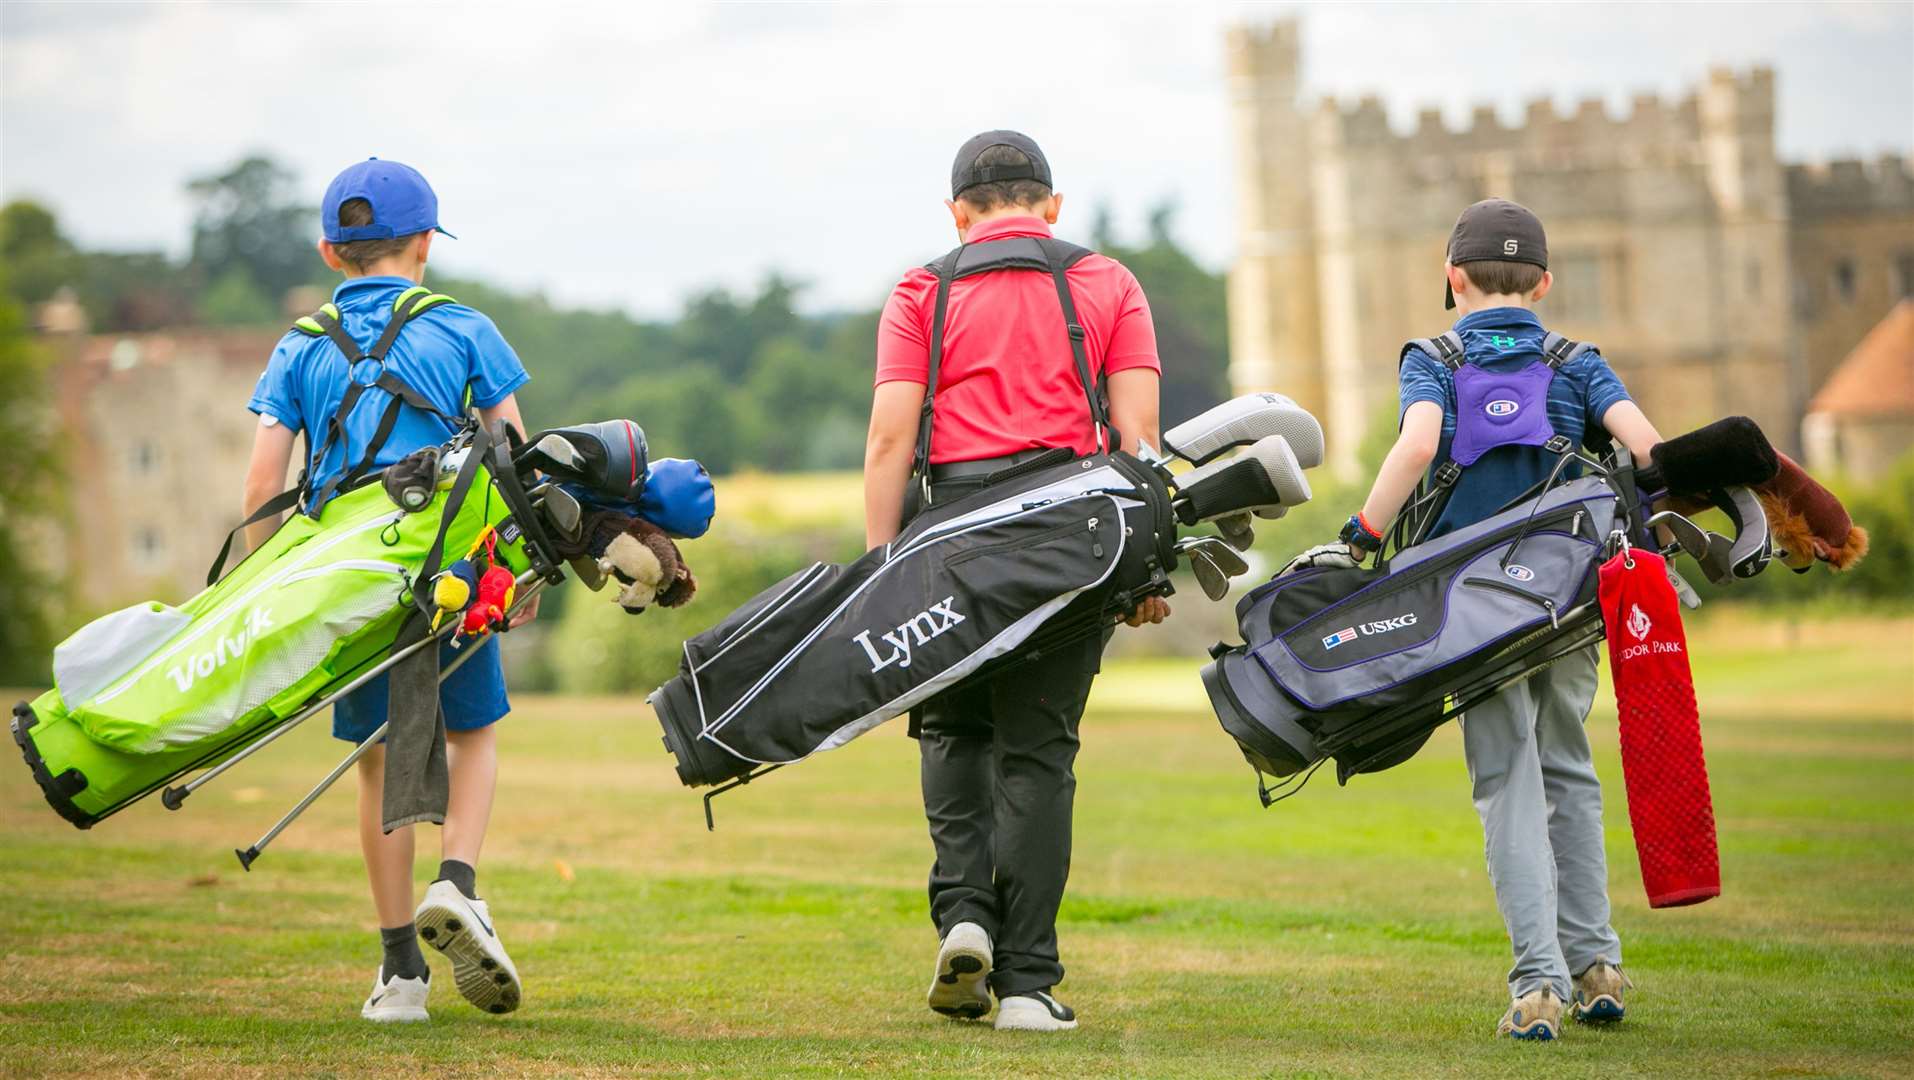 Leeds Castle Golf Course is perfect for young golfers looking to have fun and improve their game. (www.matthewwalkerphotography.com)